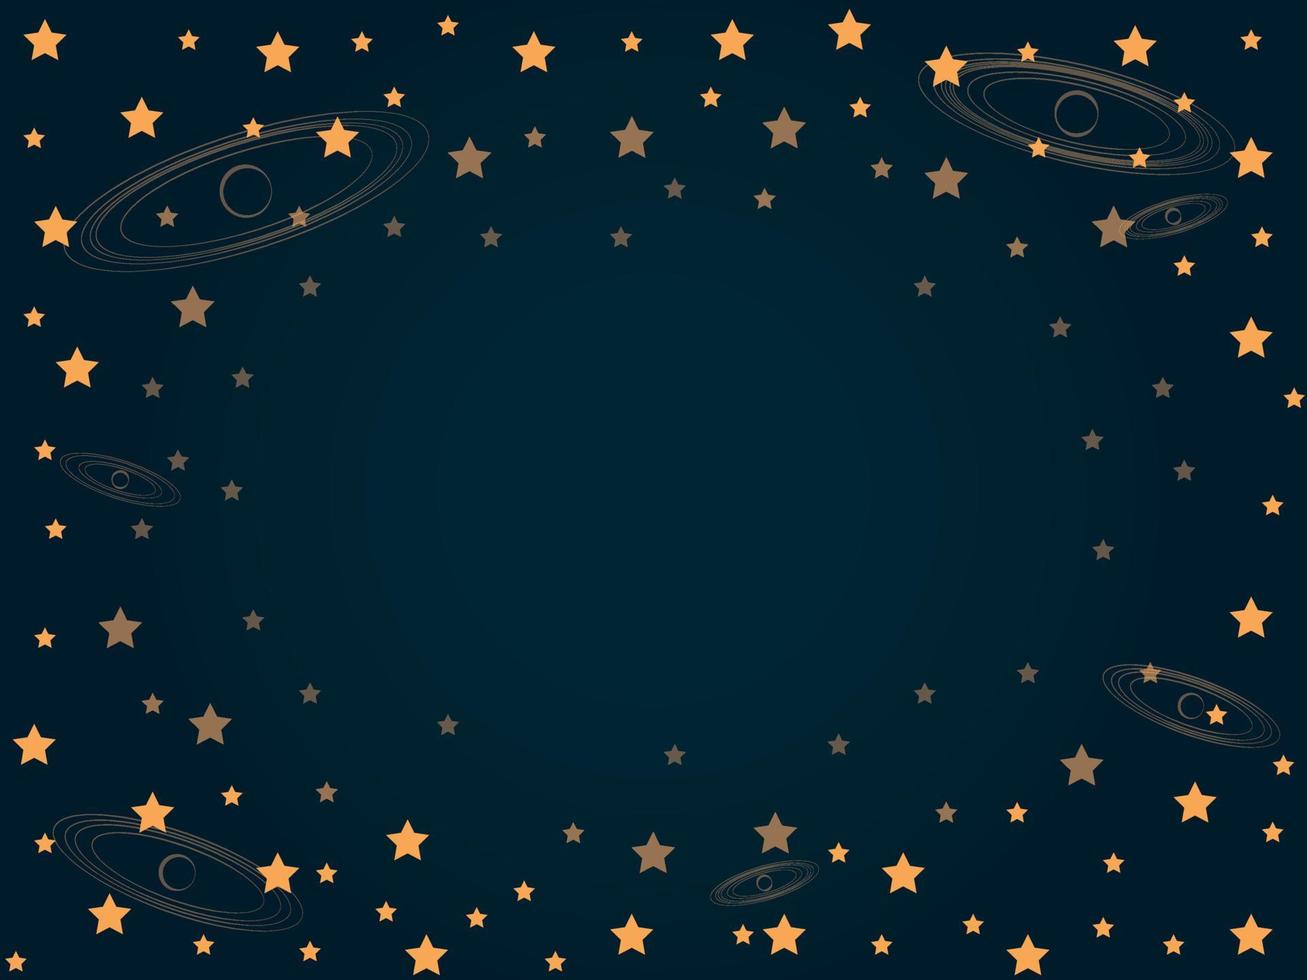 Abstract golden star sky background with circle patterns vector illustration